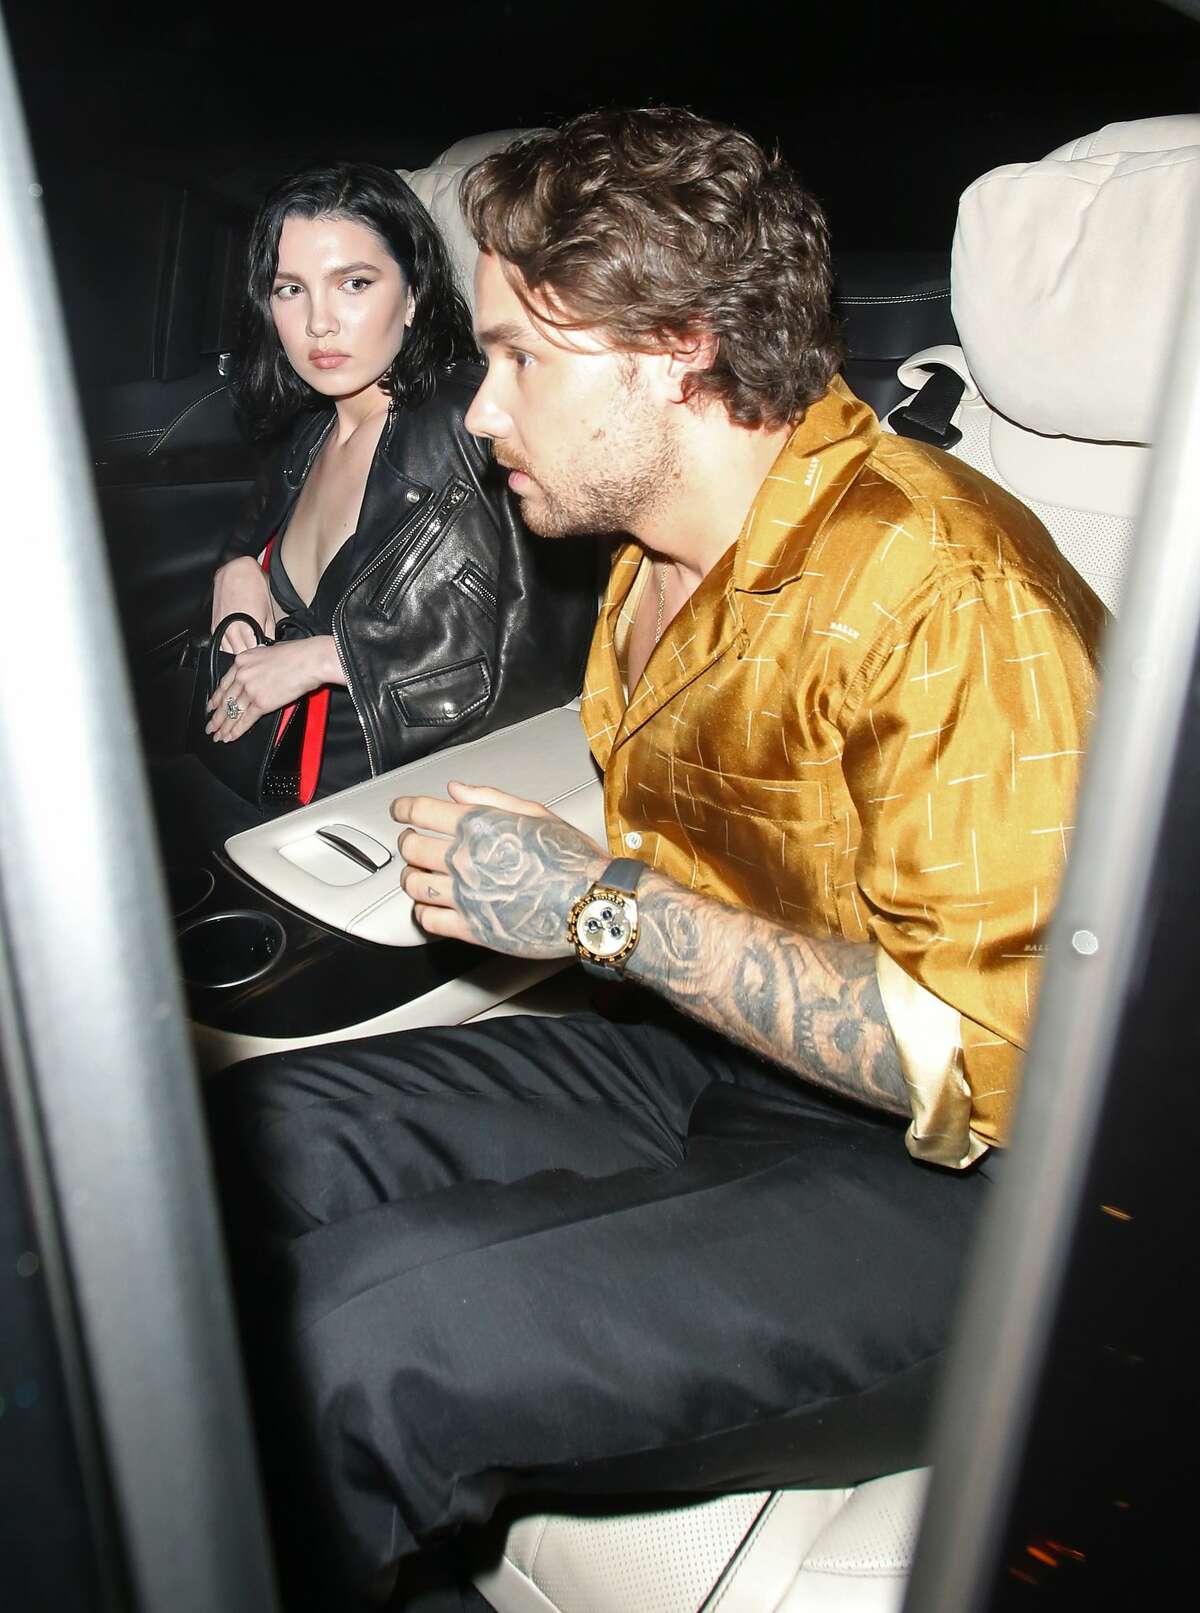 Liam Payne and Maya Henry are seen leaving Novikov restaurant on August 27, 2020 in London, England. (Photo by Dan/Will/MEGA/GC Images)